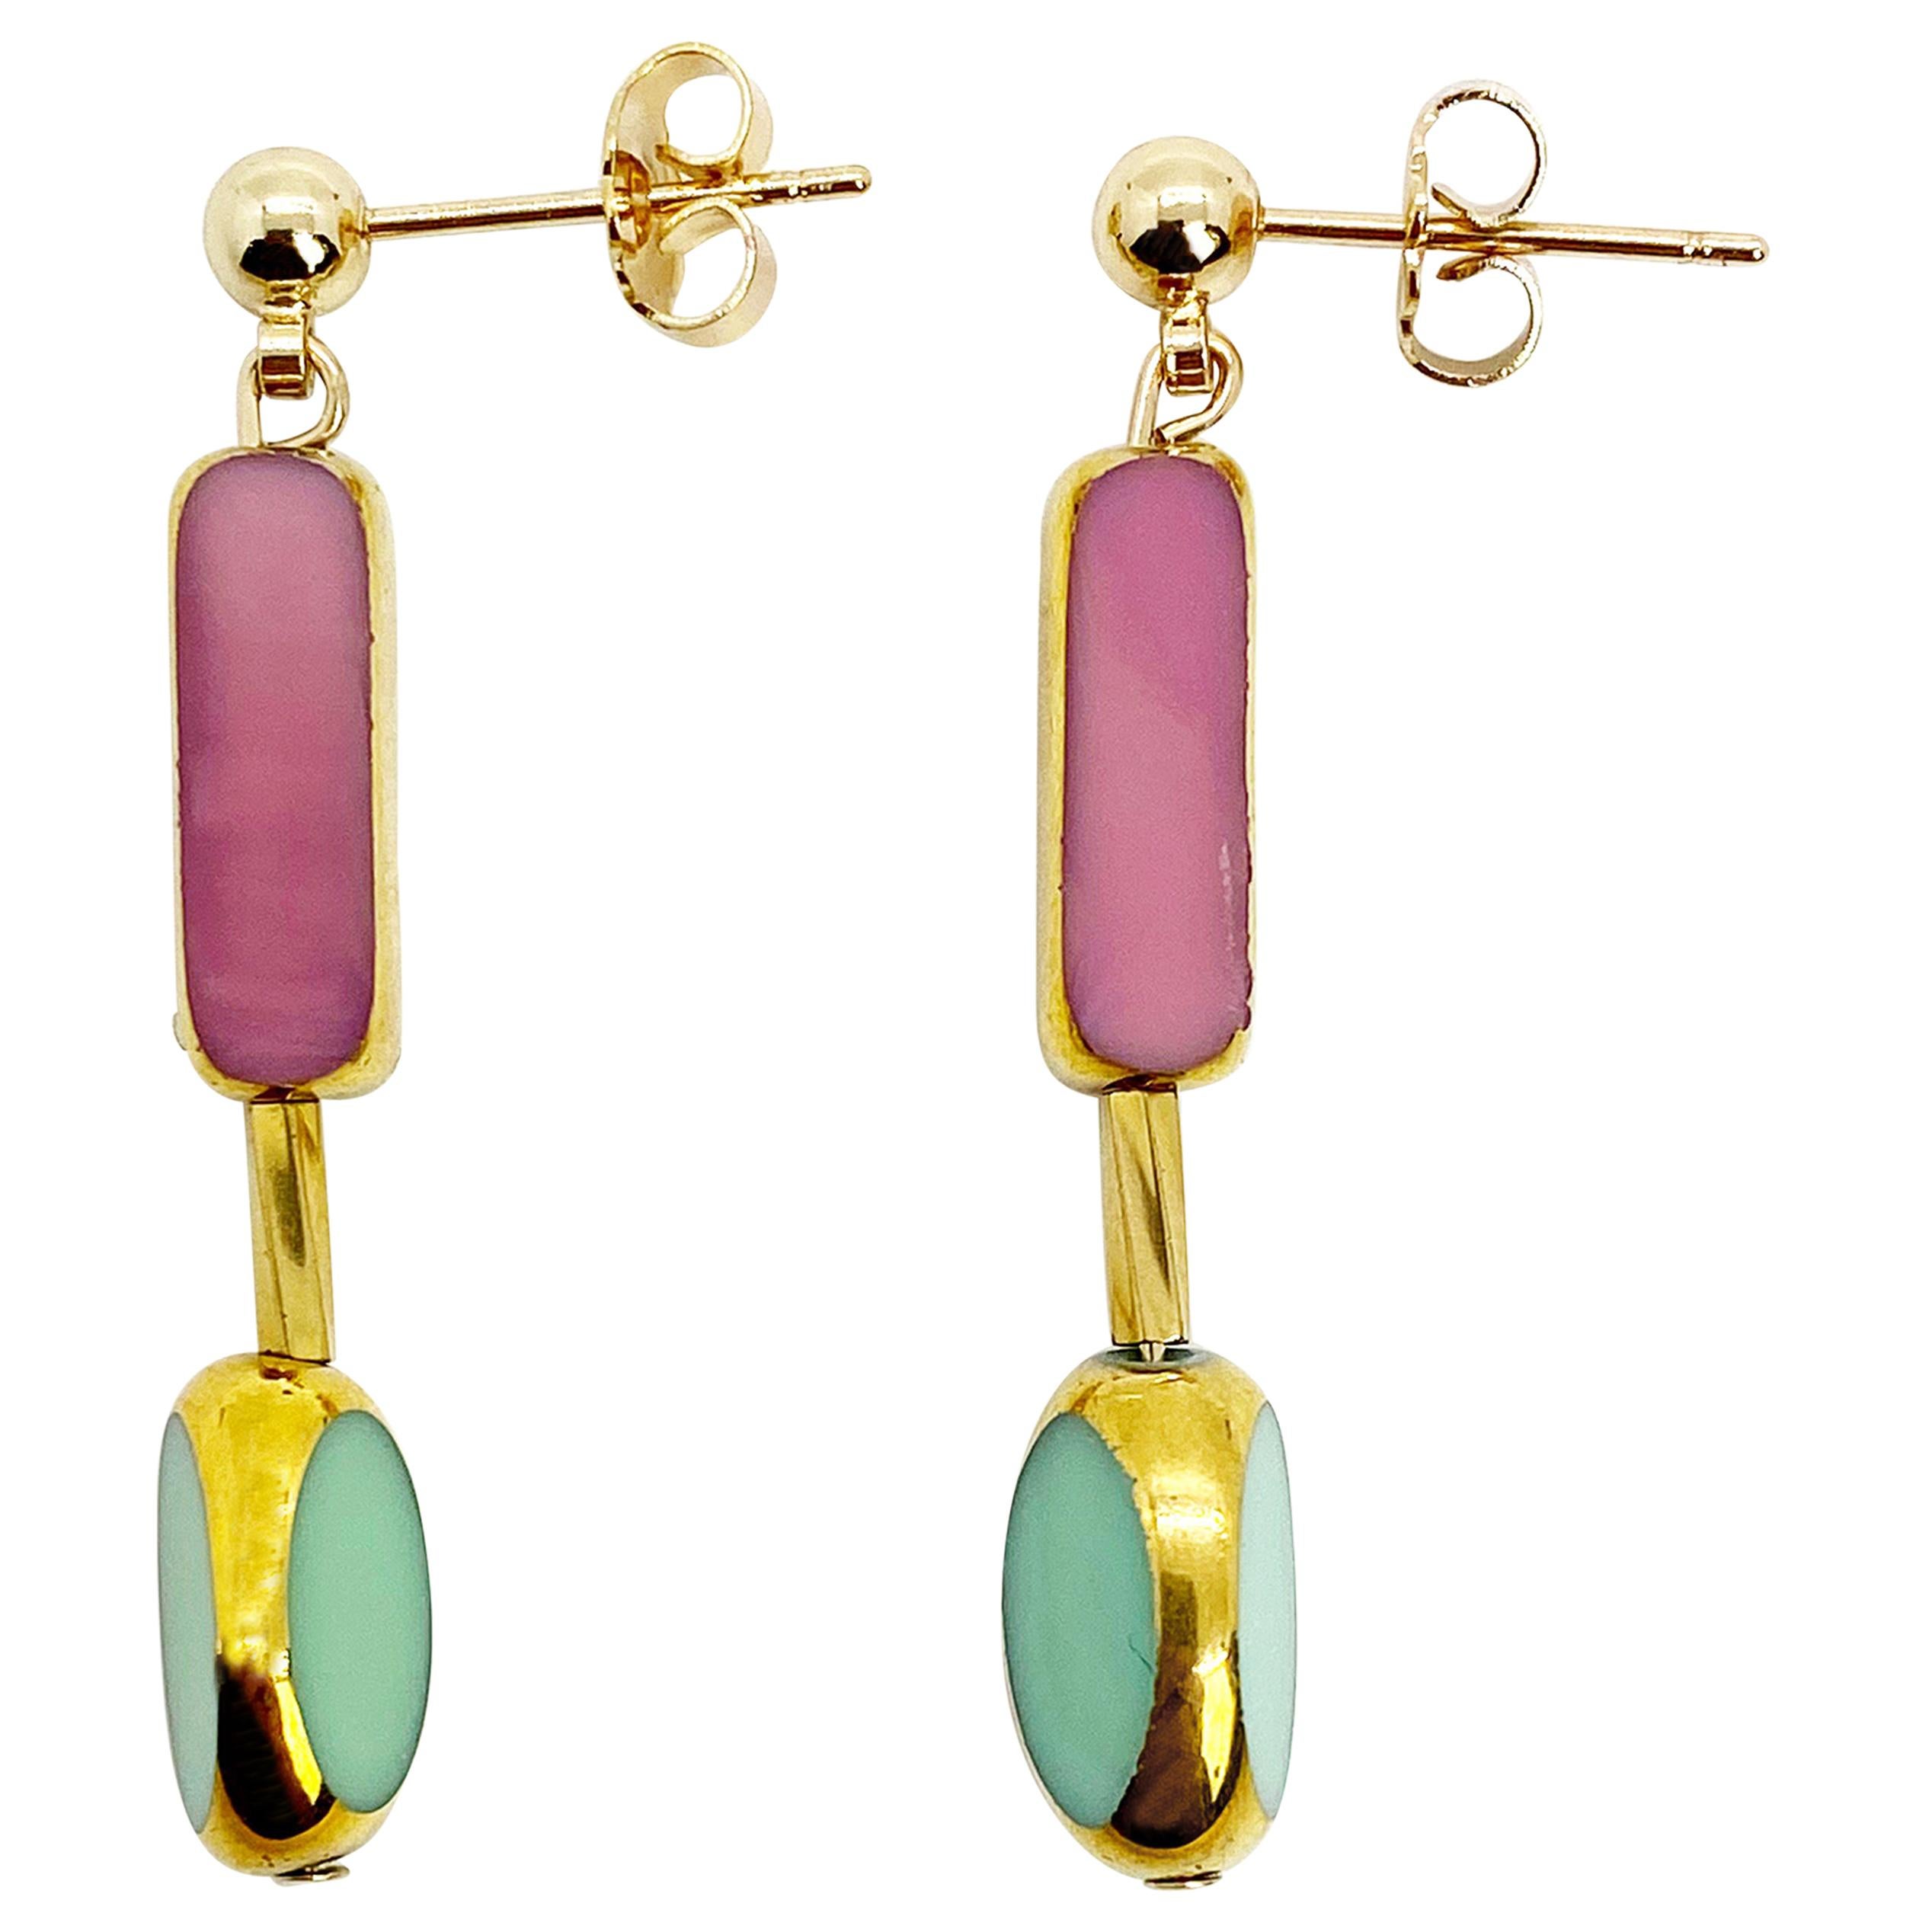 Pink & Bean Vintage German Glass Beads edged with 24K gold Earrings